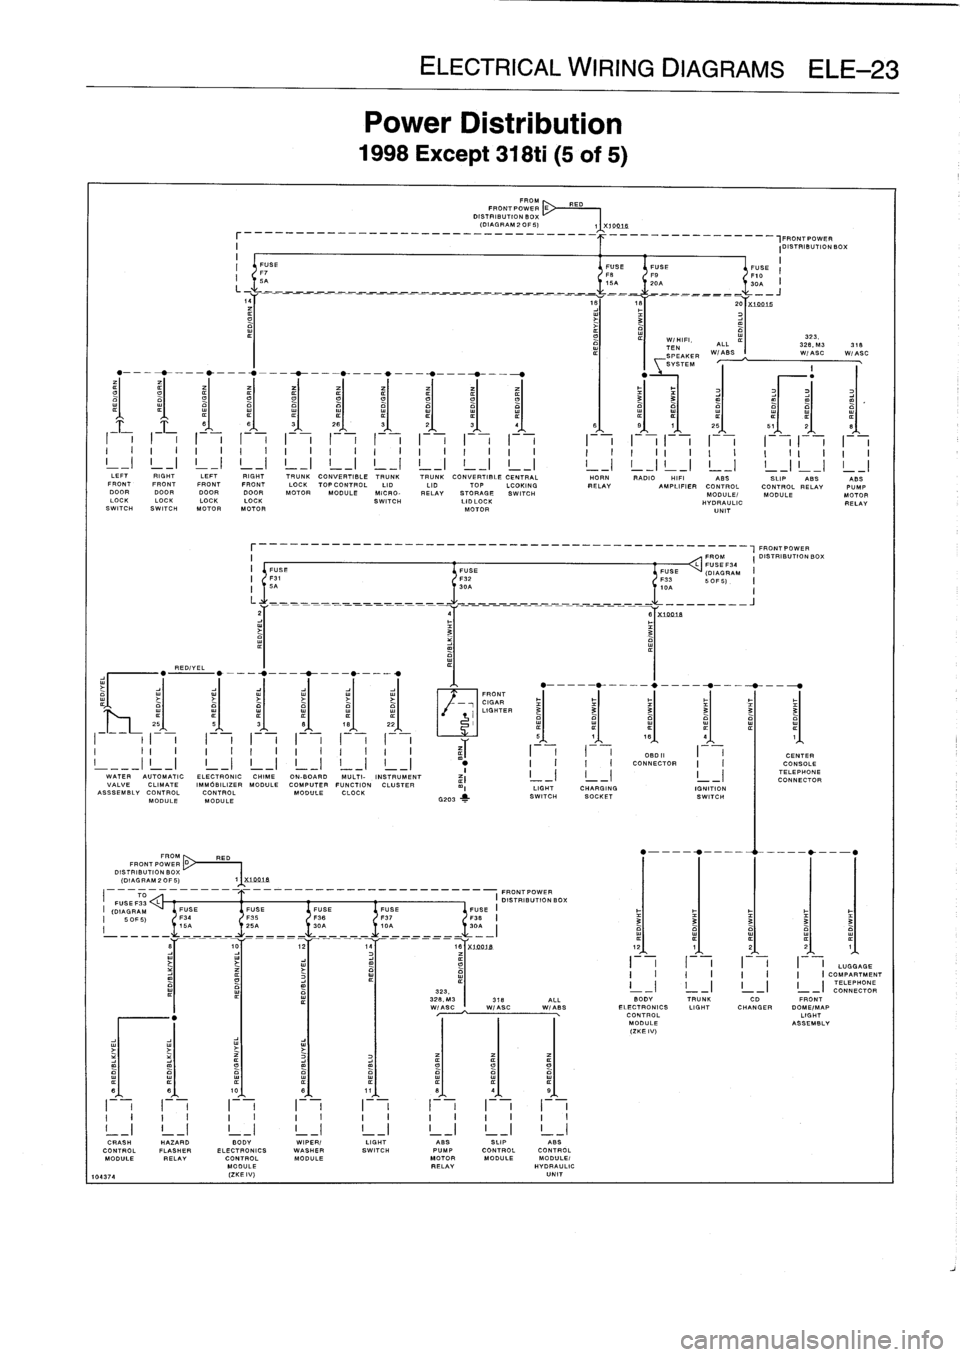 BMW 318i 1997 E36 Owners Manual 
REDIYEL

FROM
RED
FRONT
PO
WE
R
D~
DISTRIBUTION
BOX
(DIAGRAM
2
OF
5)

_
_
_
_
_
_
_
_
_
_
__
,FRONTPOWER
I

	

IDISTRIBUTIONBOX
I

	

II
FUSE

	

FUSEFUSE

	

FUSE
F7

	

FS

	

FO

	

F10
I
I
5A

	
